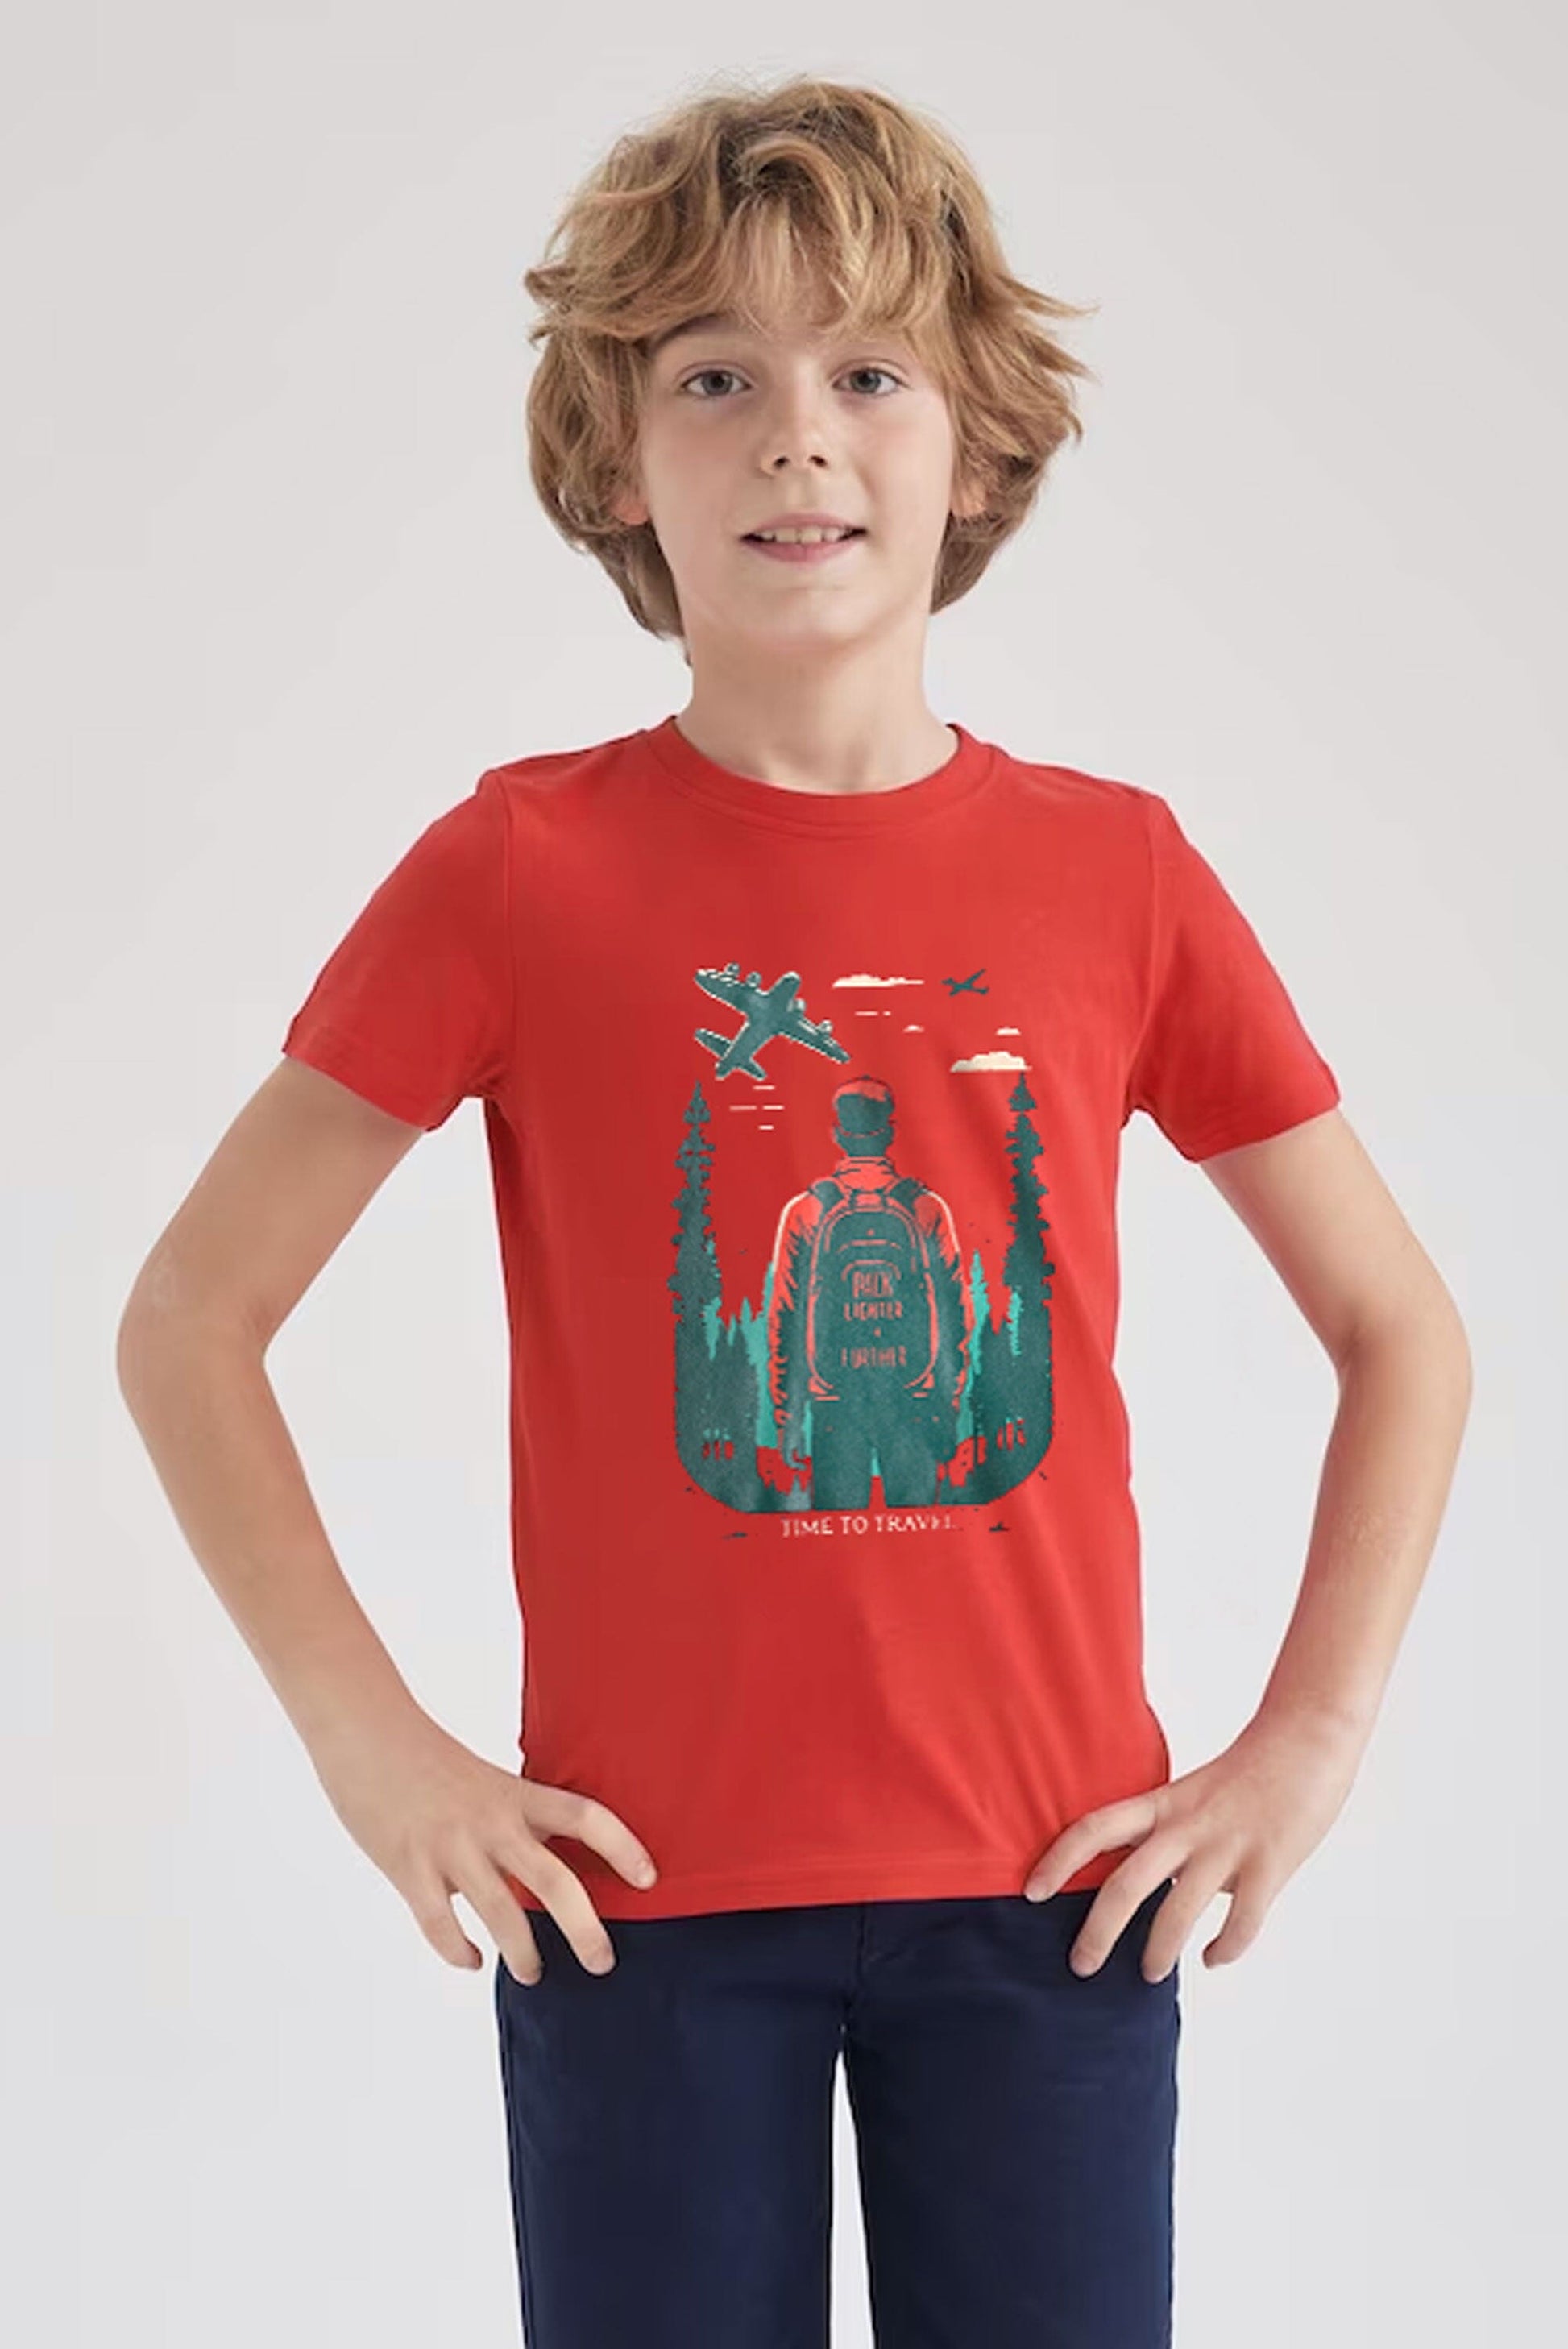 Polo Republica Boy's Time To Travel Printed Tee Shirt Boy's Tee Shirt Polo Republica 